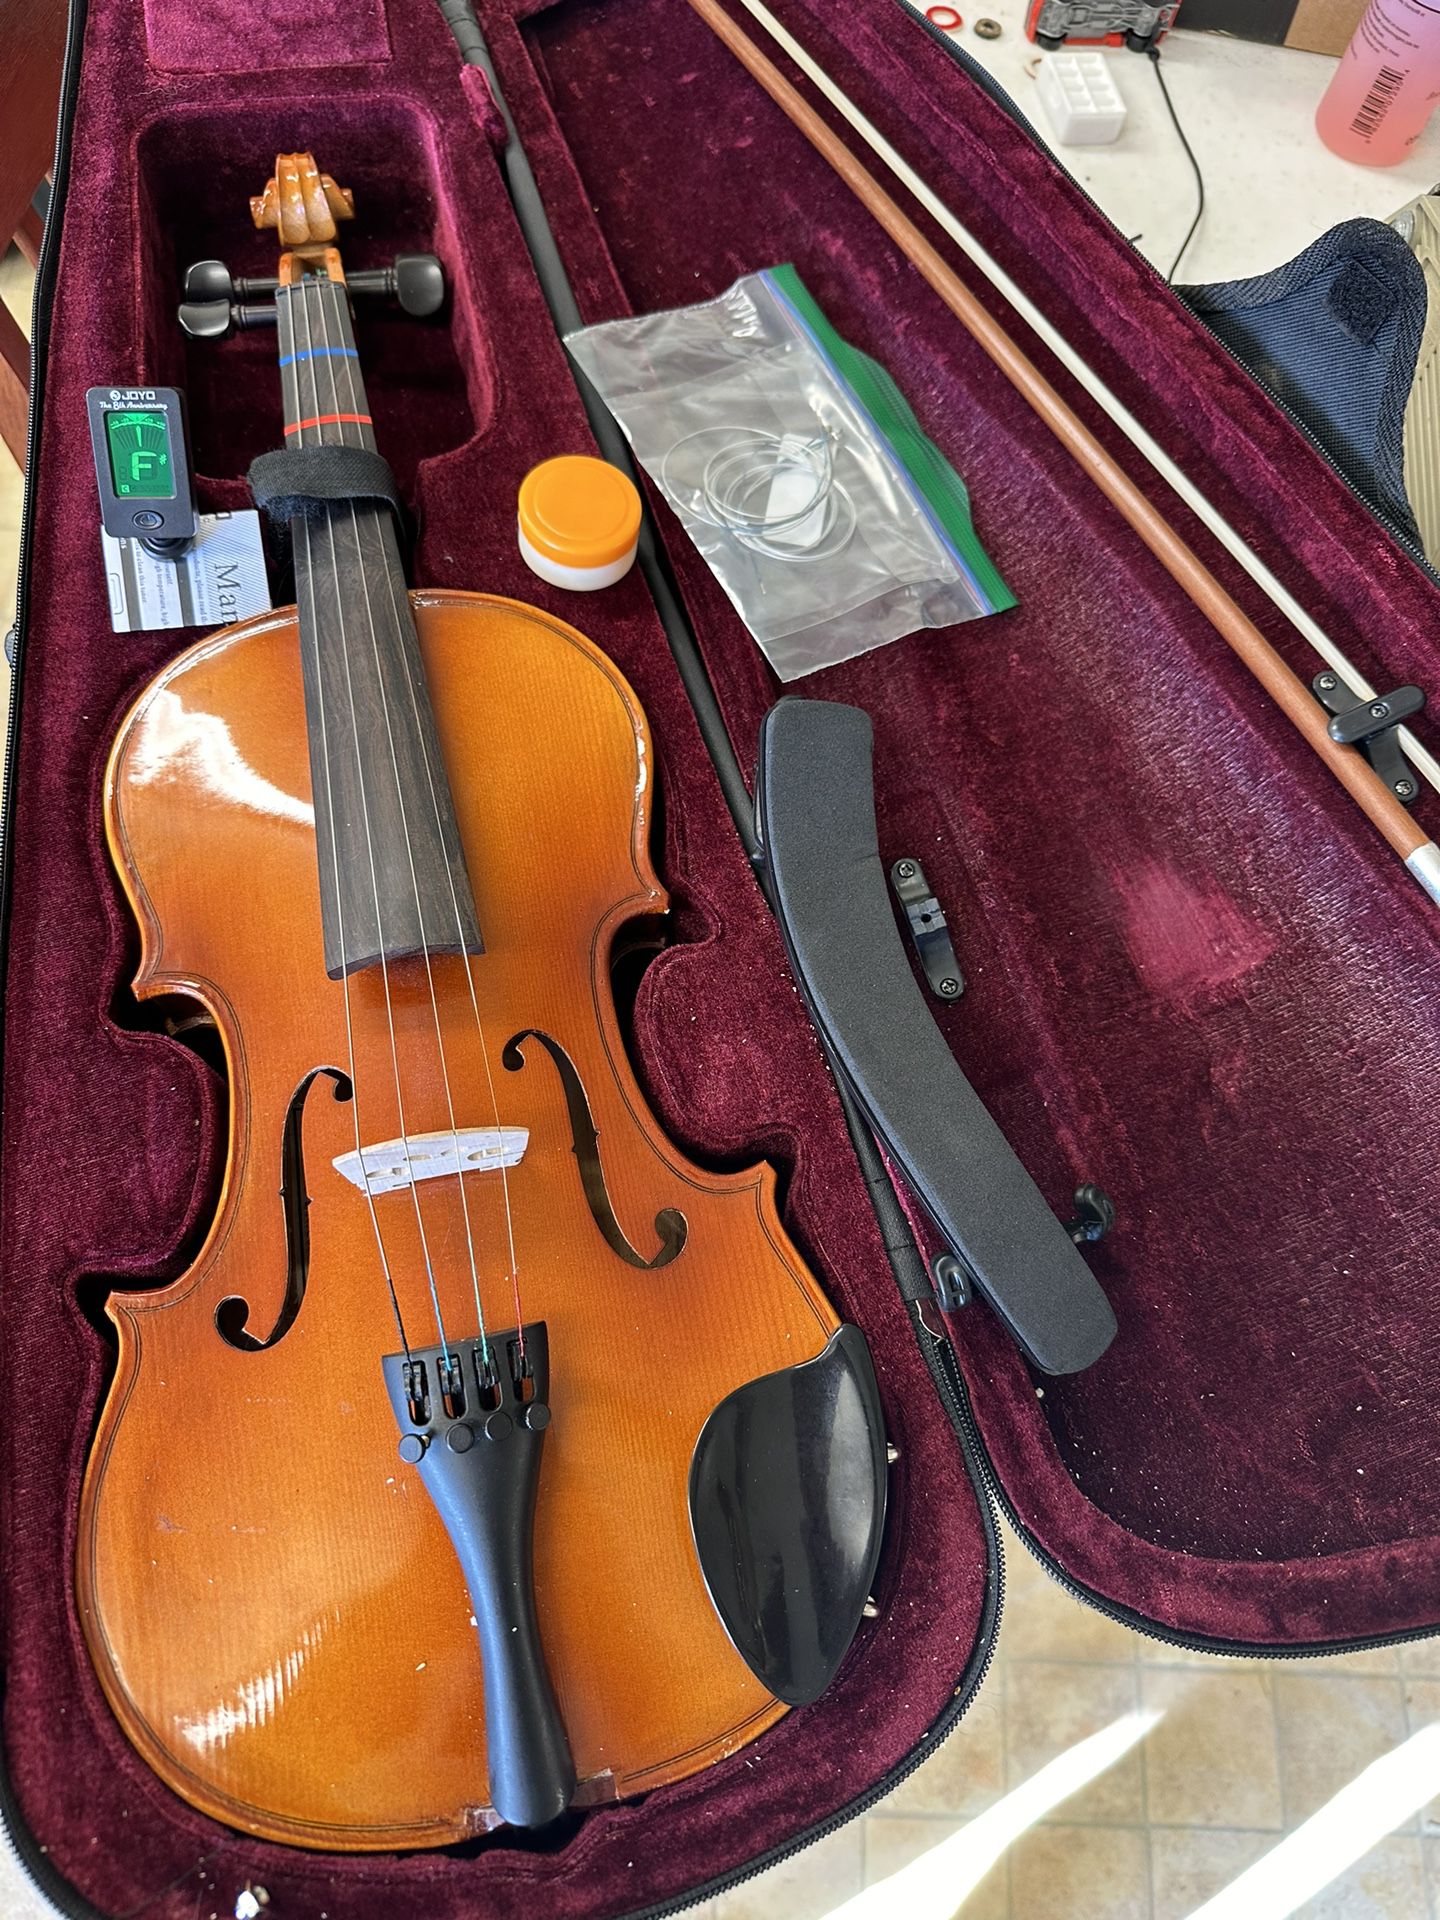 WEST 4/4 Mendini MV400 Violin Outfit $80 Firm